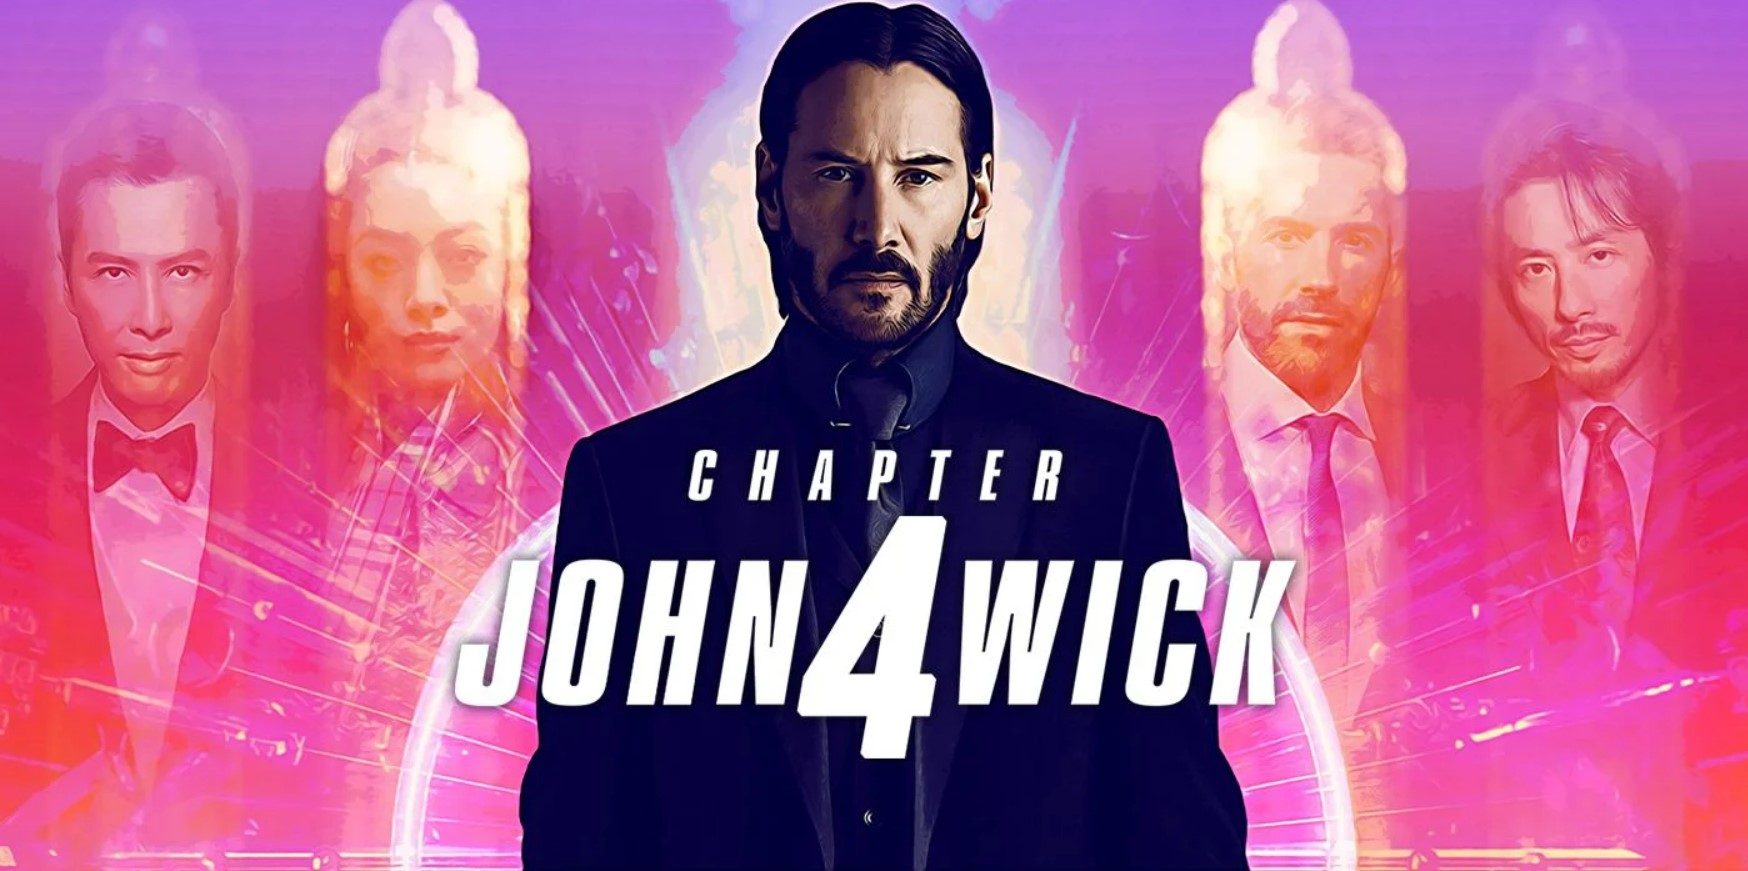 Here's what fans can expect from John Wick 4